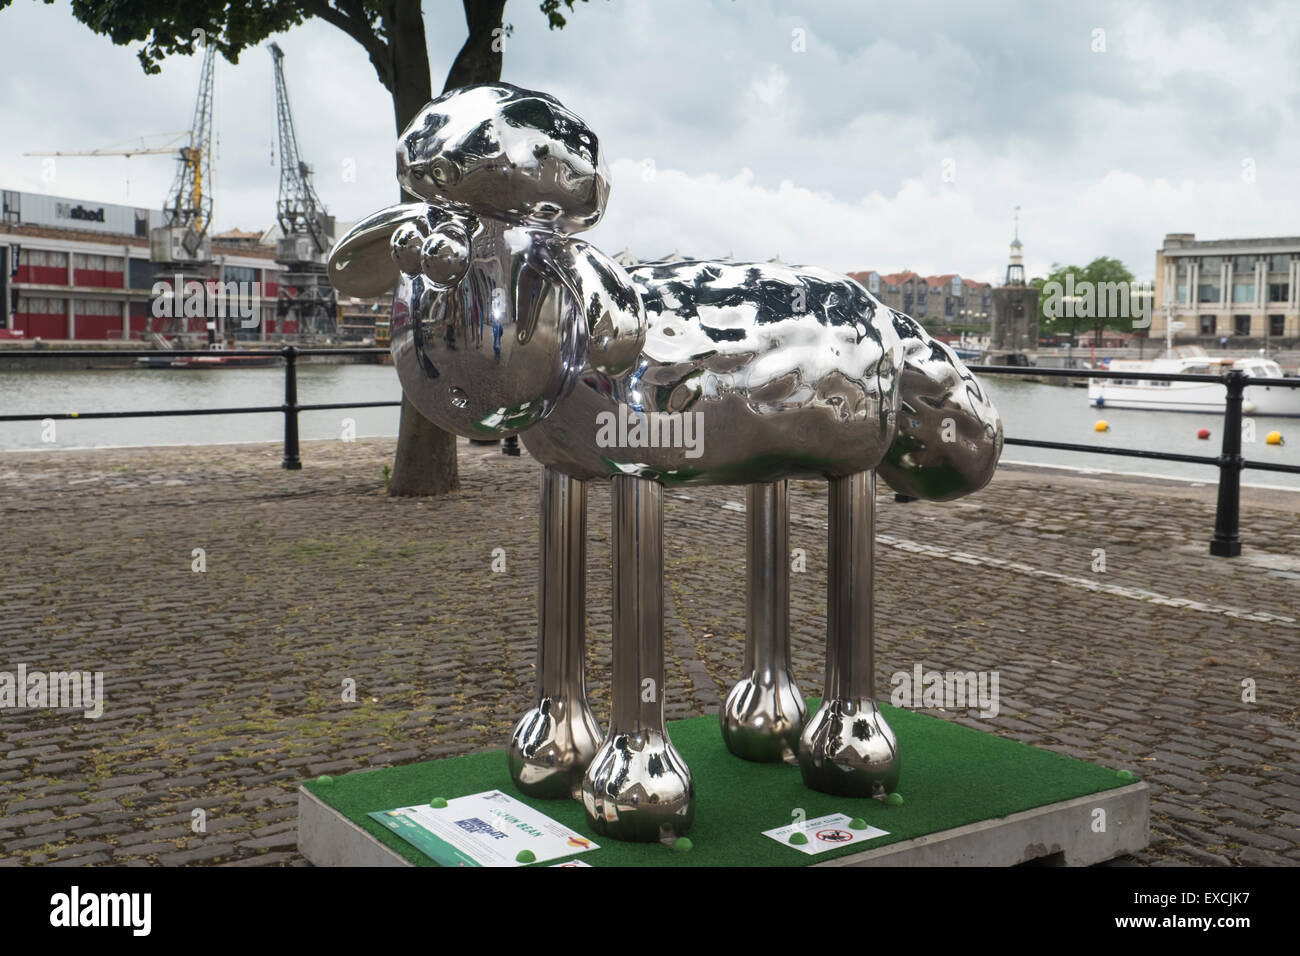 The Shaun In The City Sculptures Bristol Harbourside Stock Photo